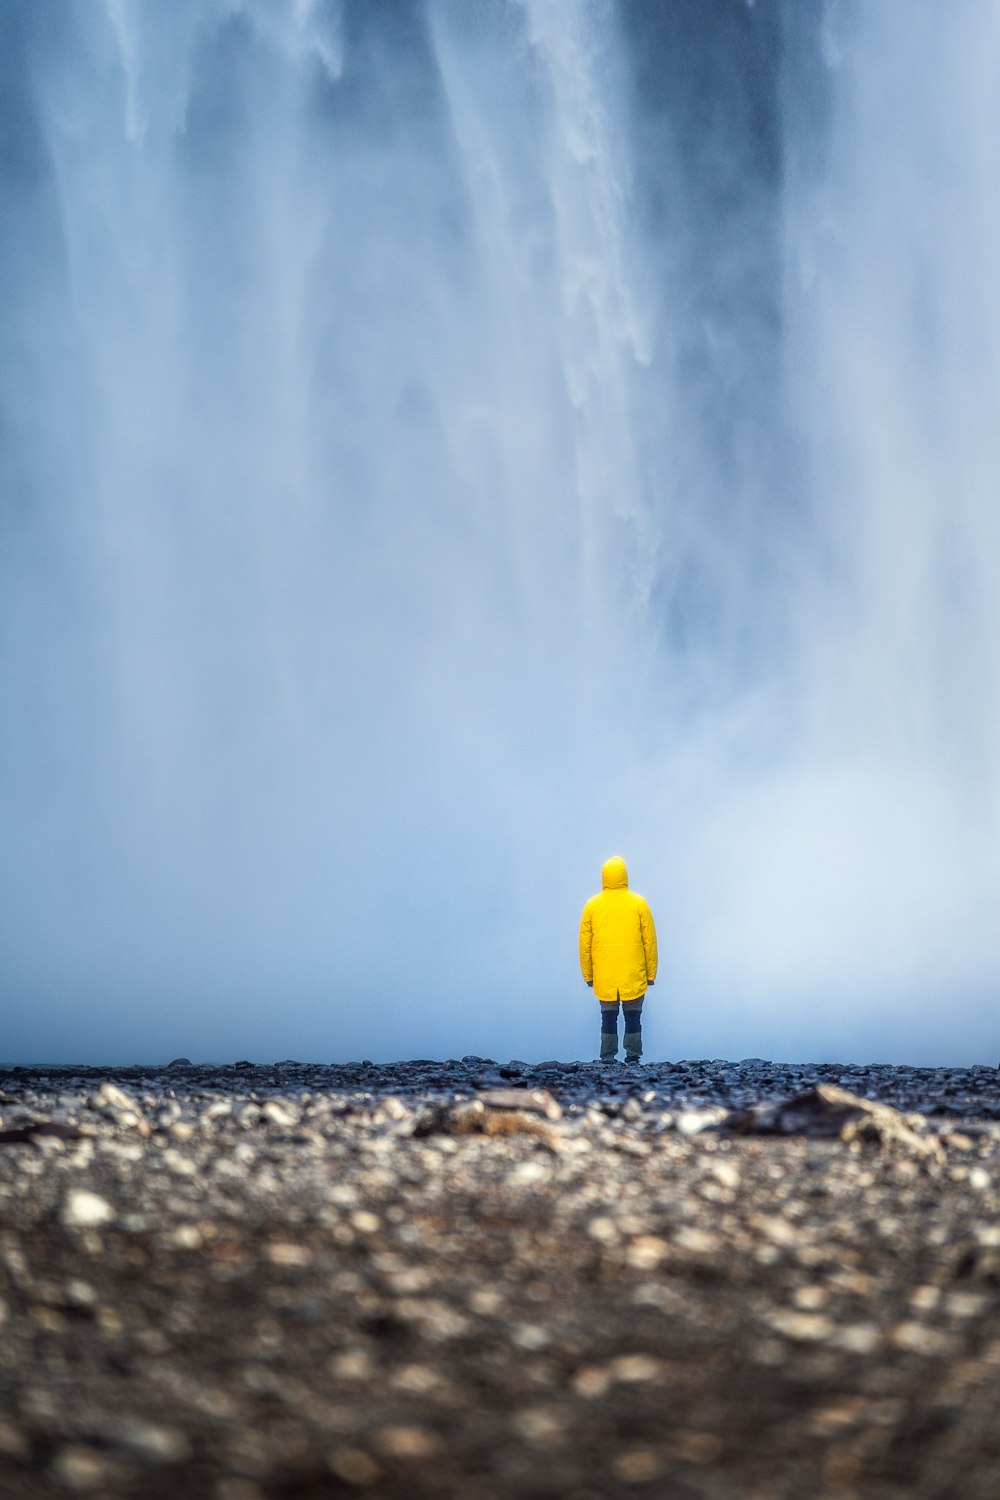 a man in a yellow jacket standing in front of a waterfall